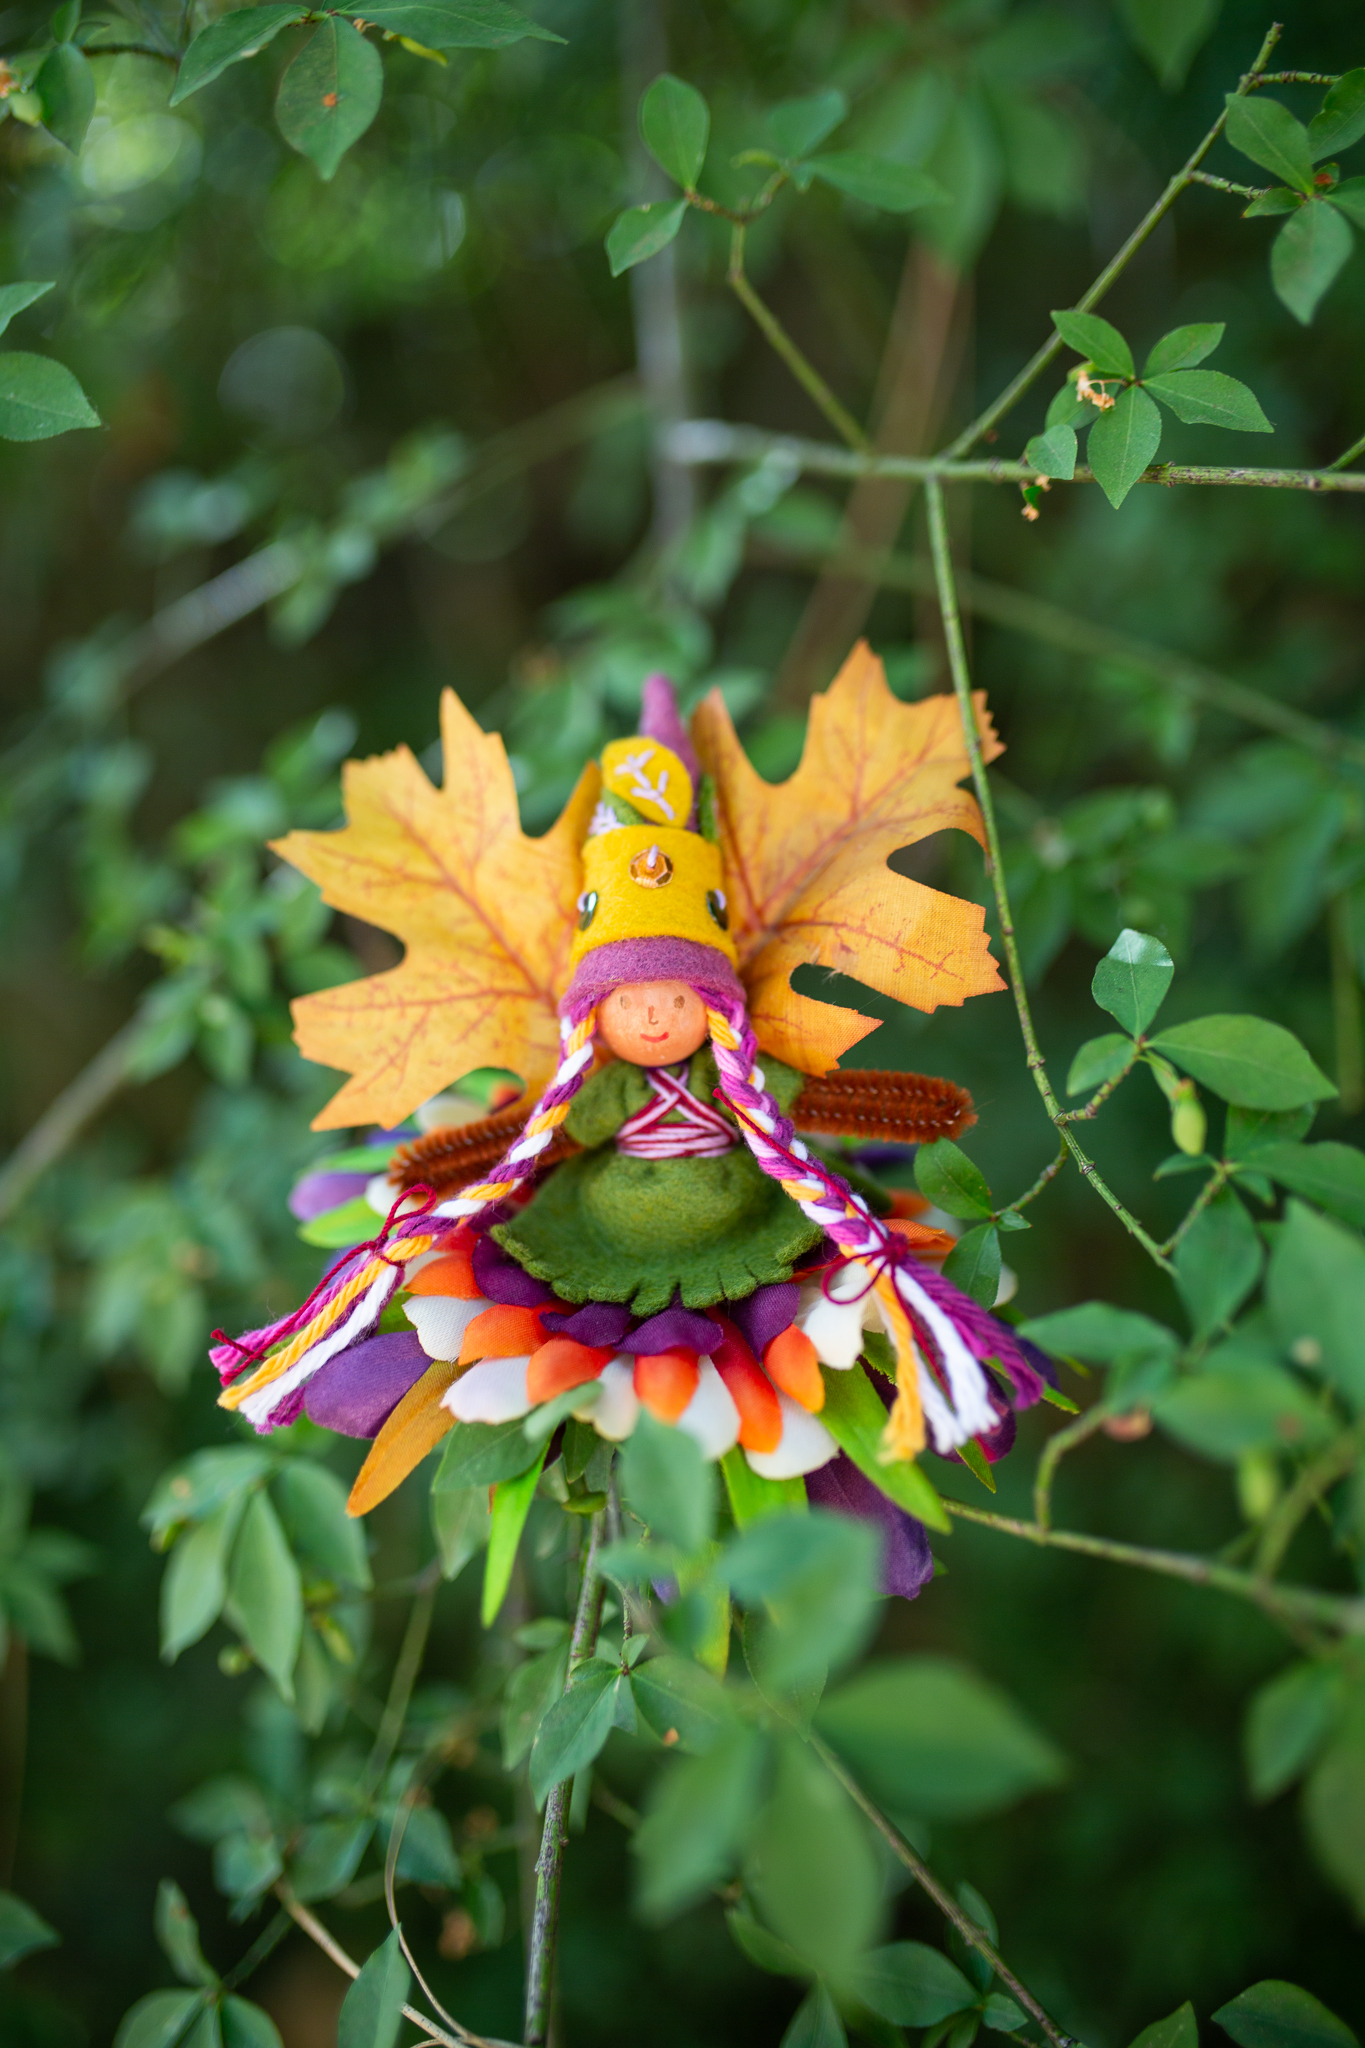 Thankful Fairy from Magical Forest Fairy Crafts Through the Seasons by Lenka Vodicka-Paredes and Asia Currie | Fairy doll for crafting with children